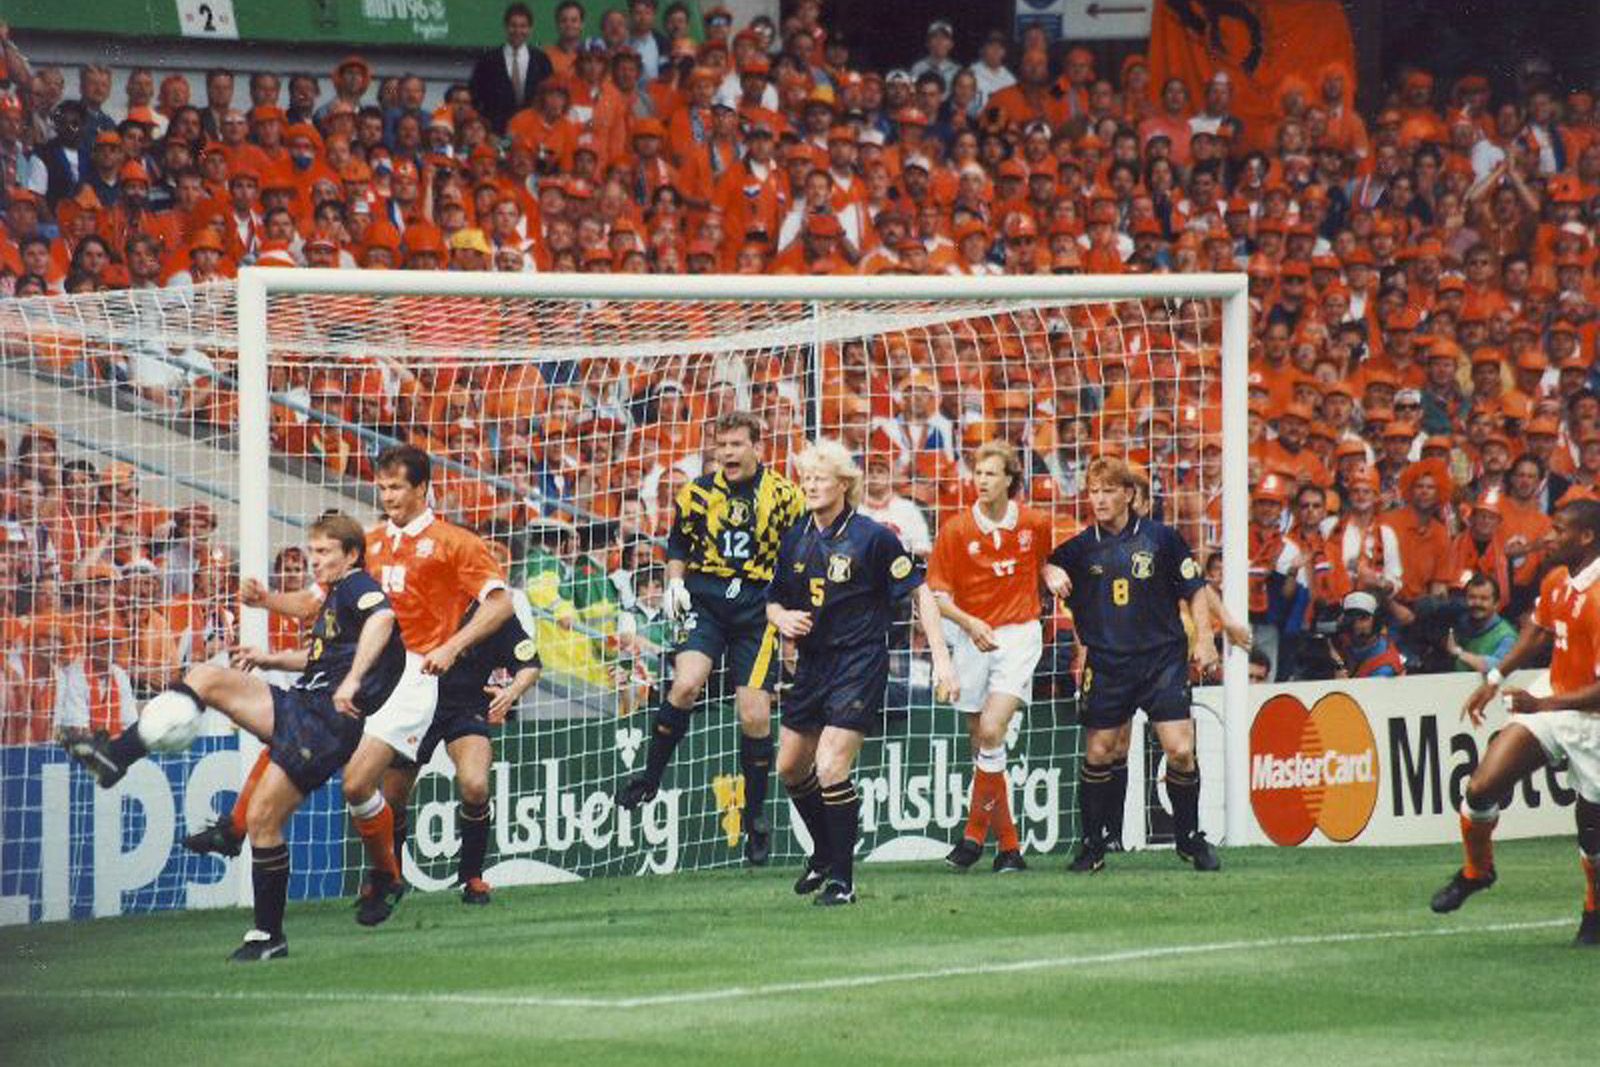 Footballs coming to your home ITV is bringing back Euro 96 image 1